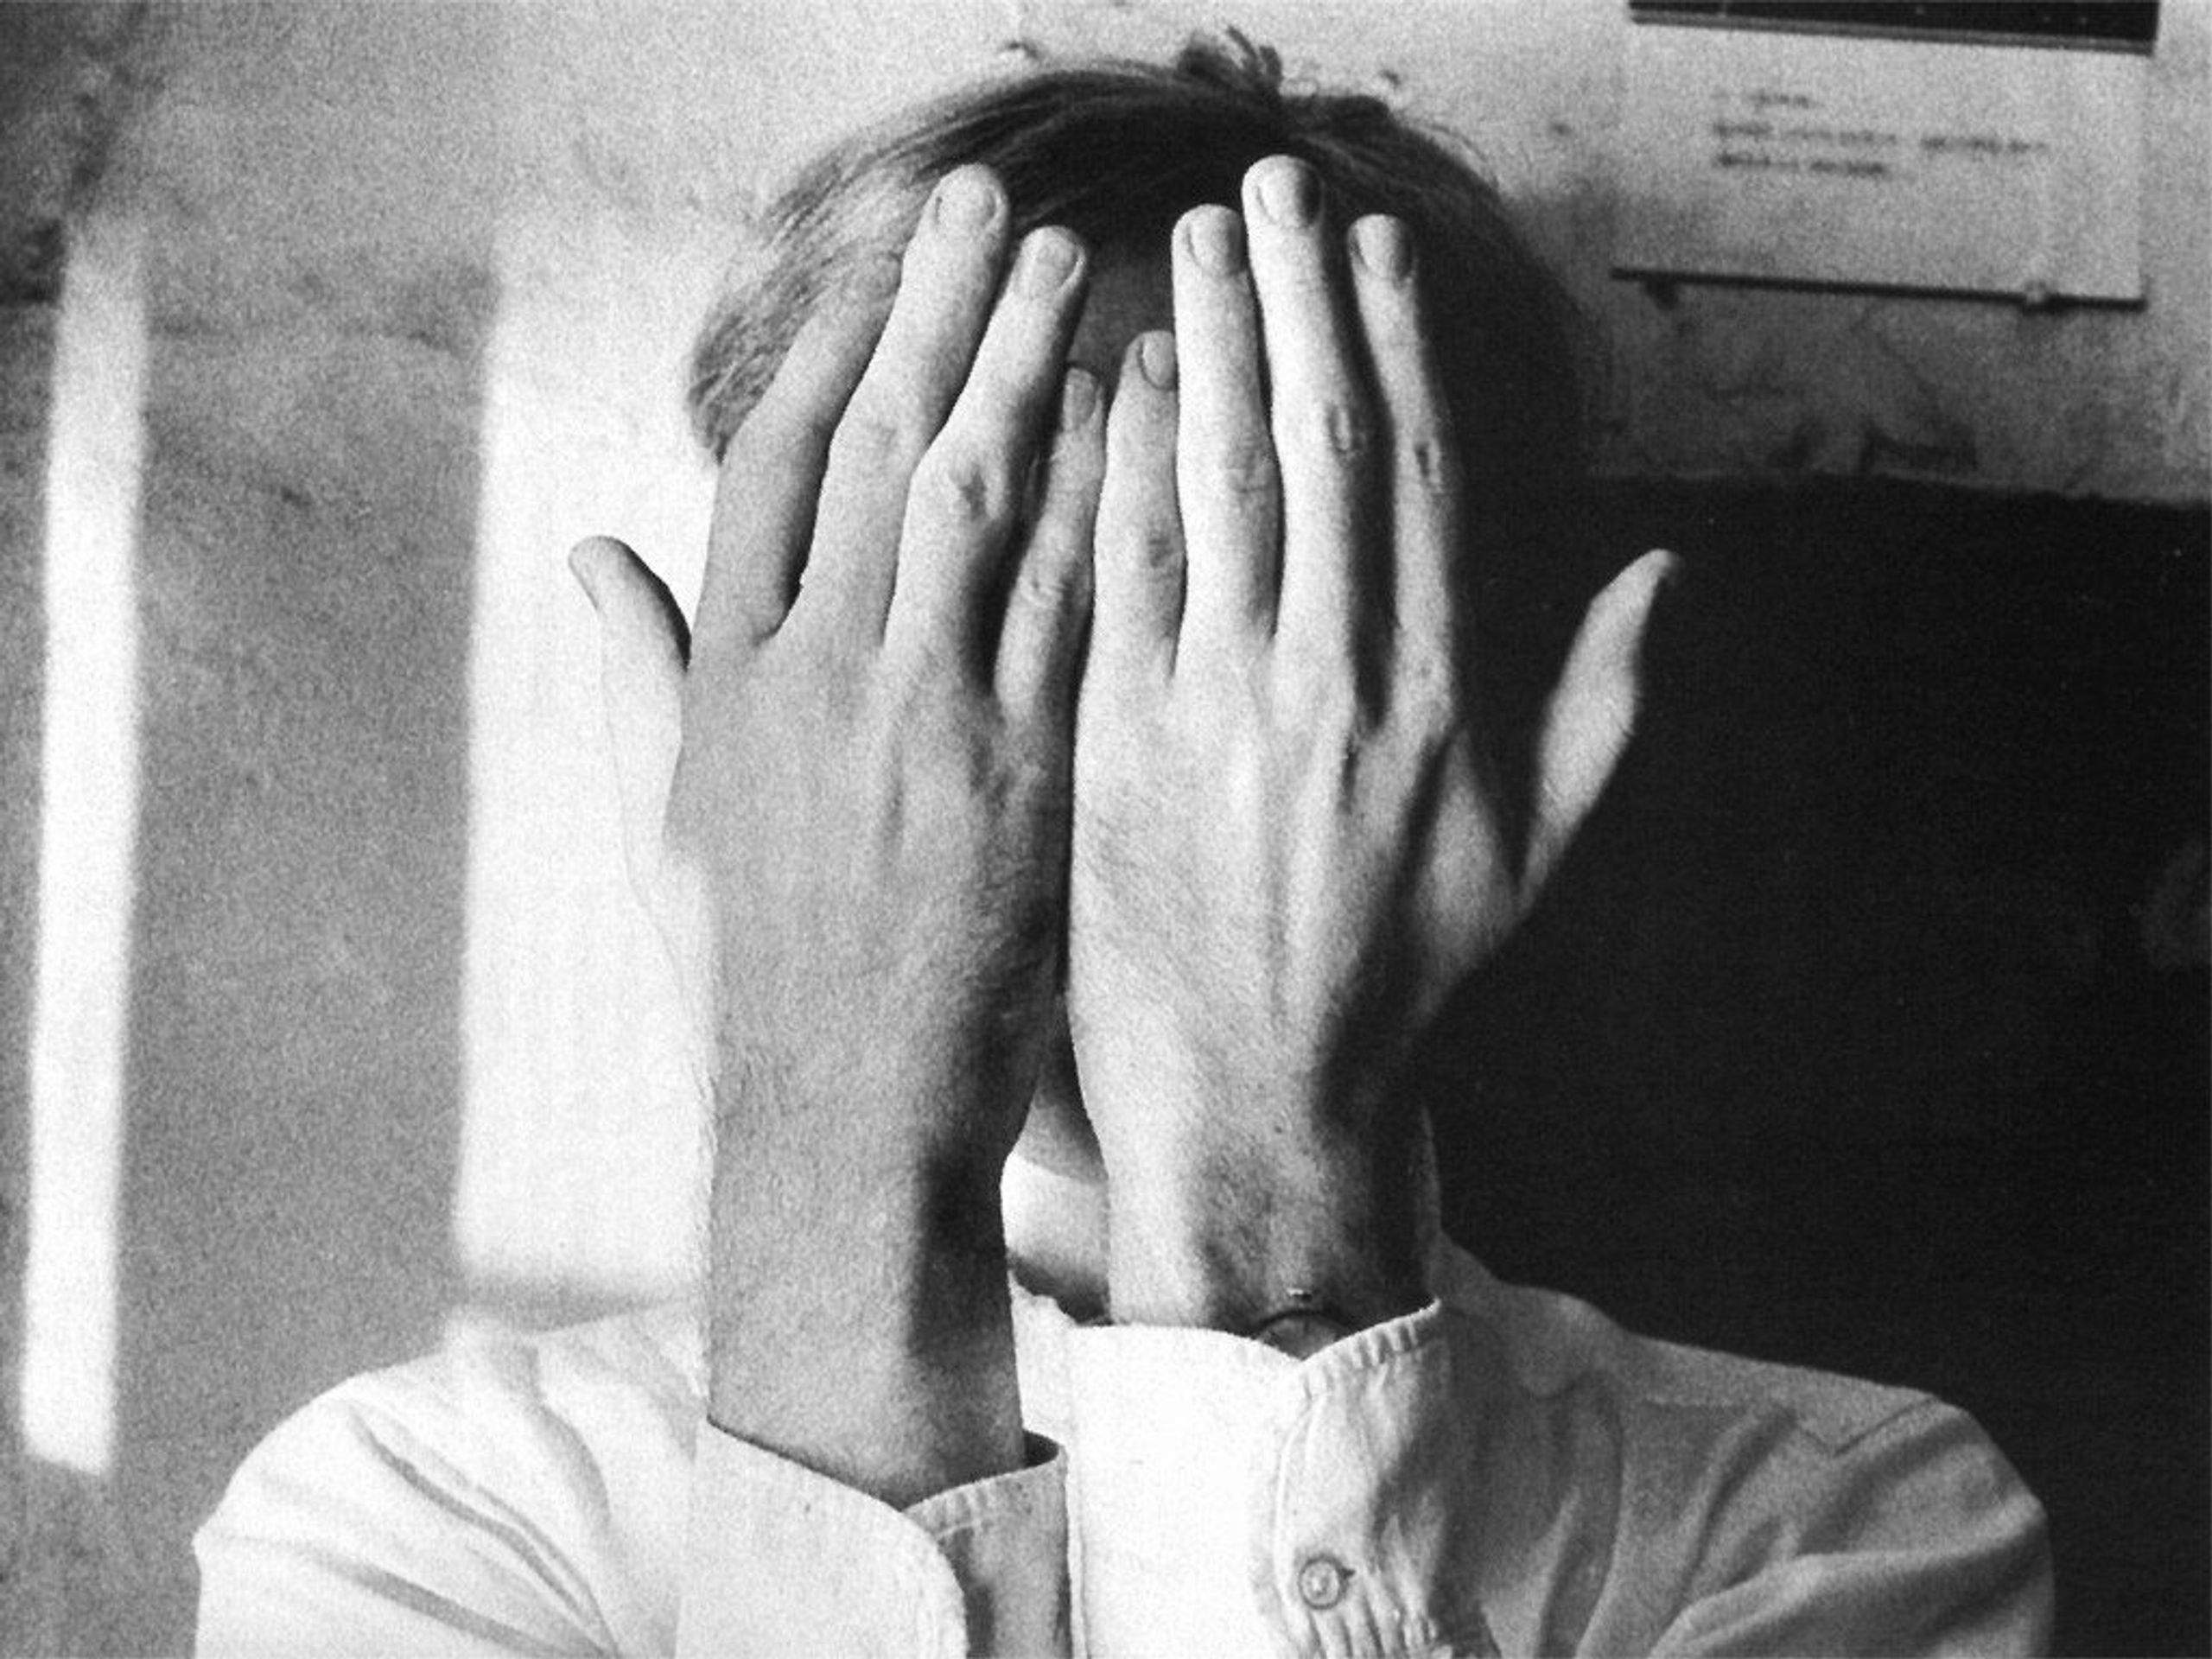 Person with hands over his face, photo by Duane Michals.